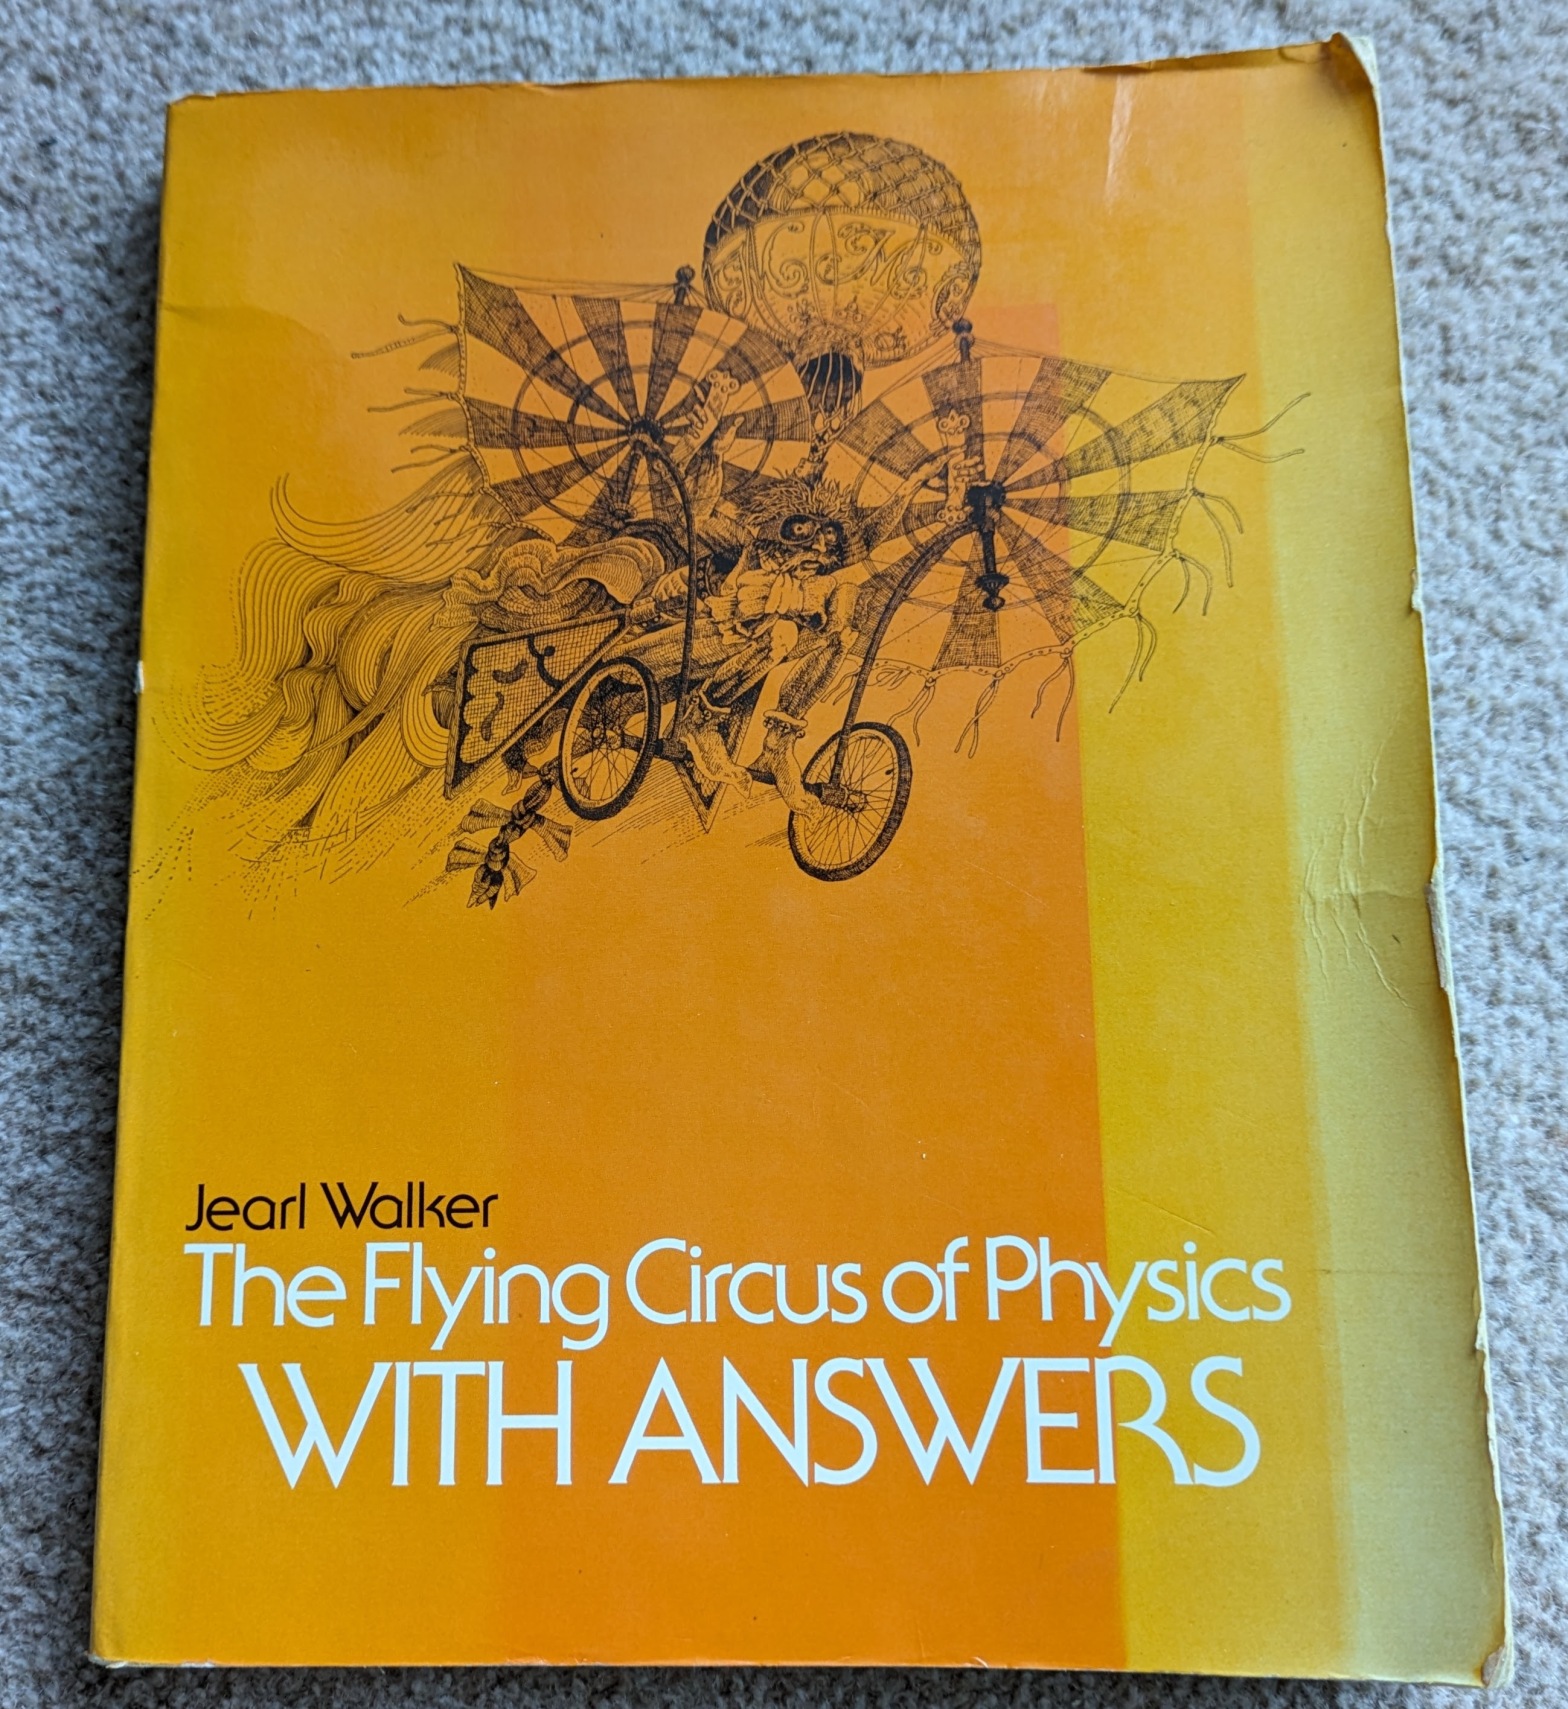 The flying circus of physics